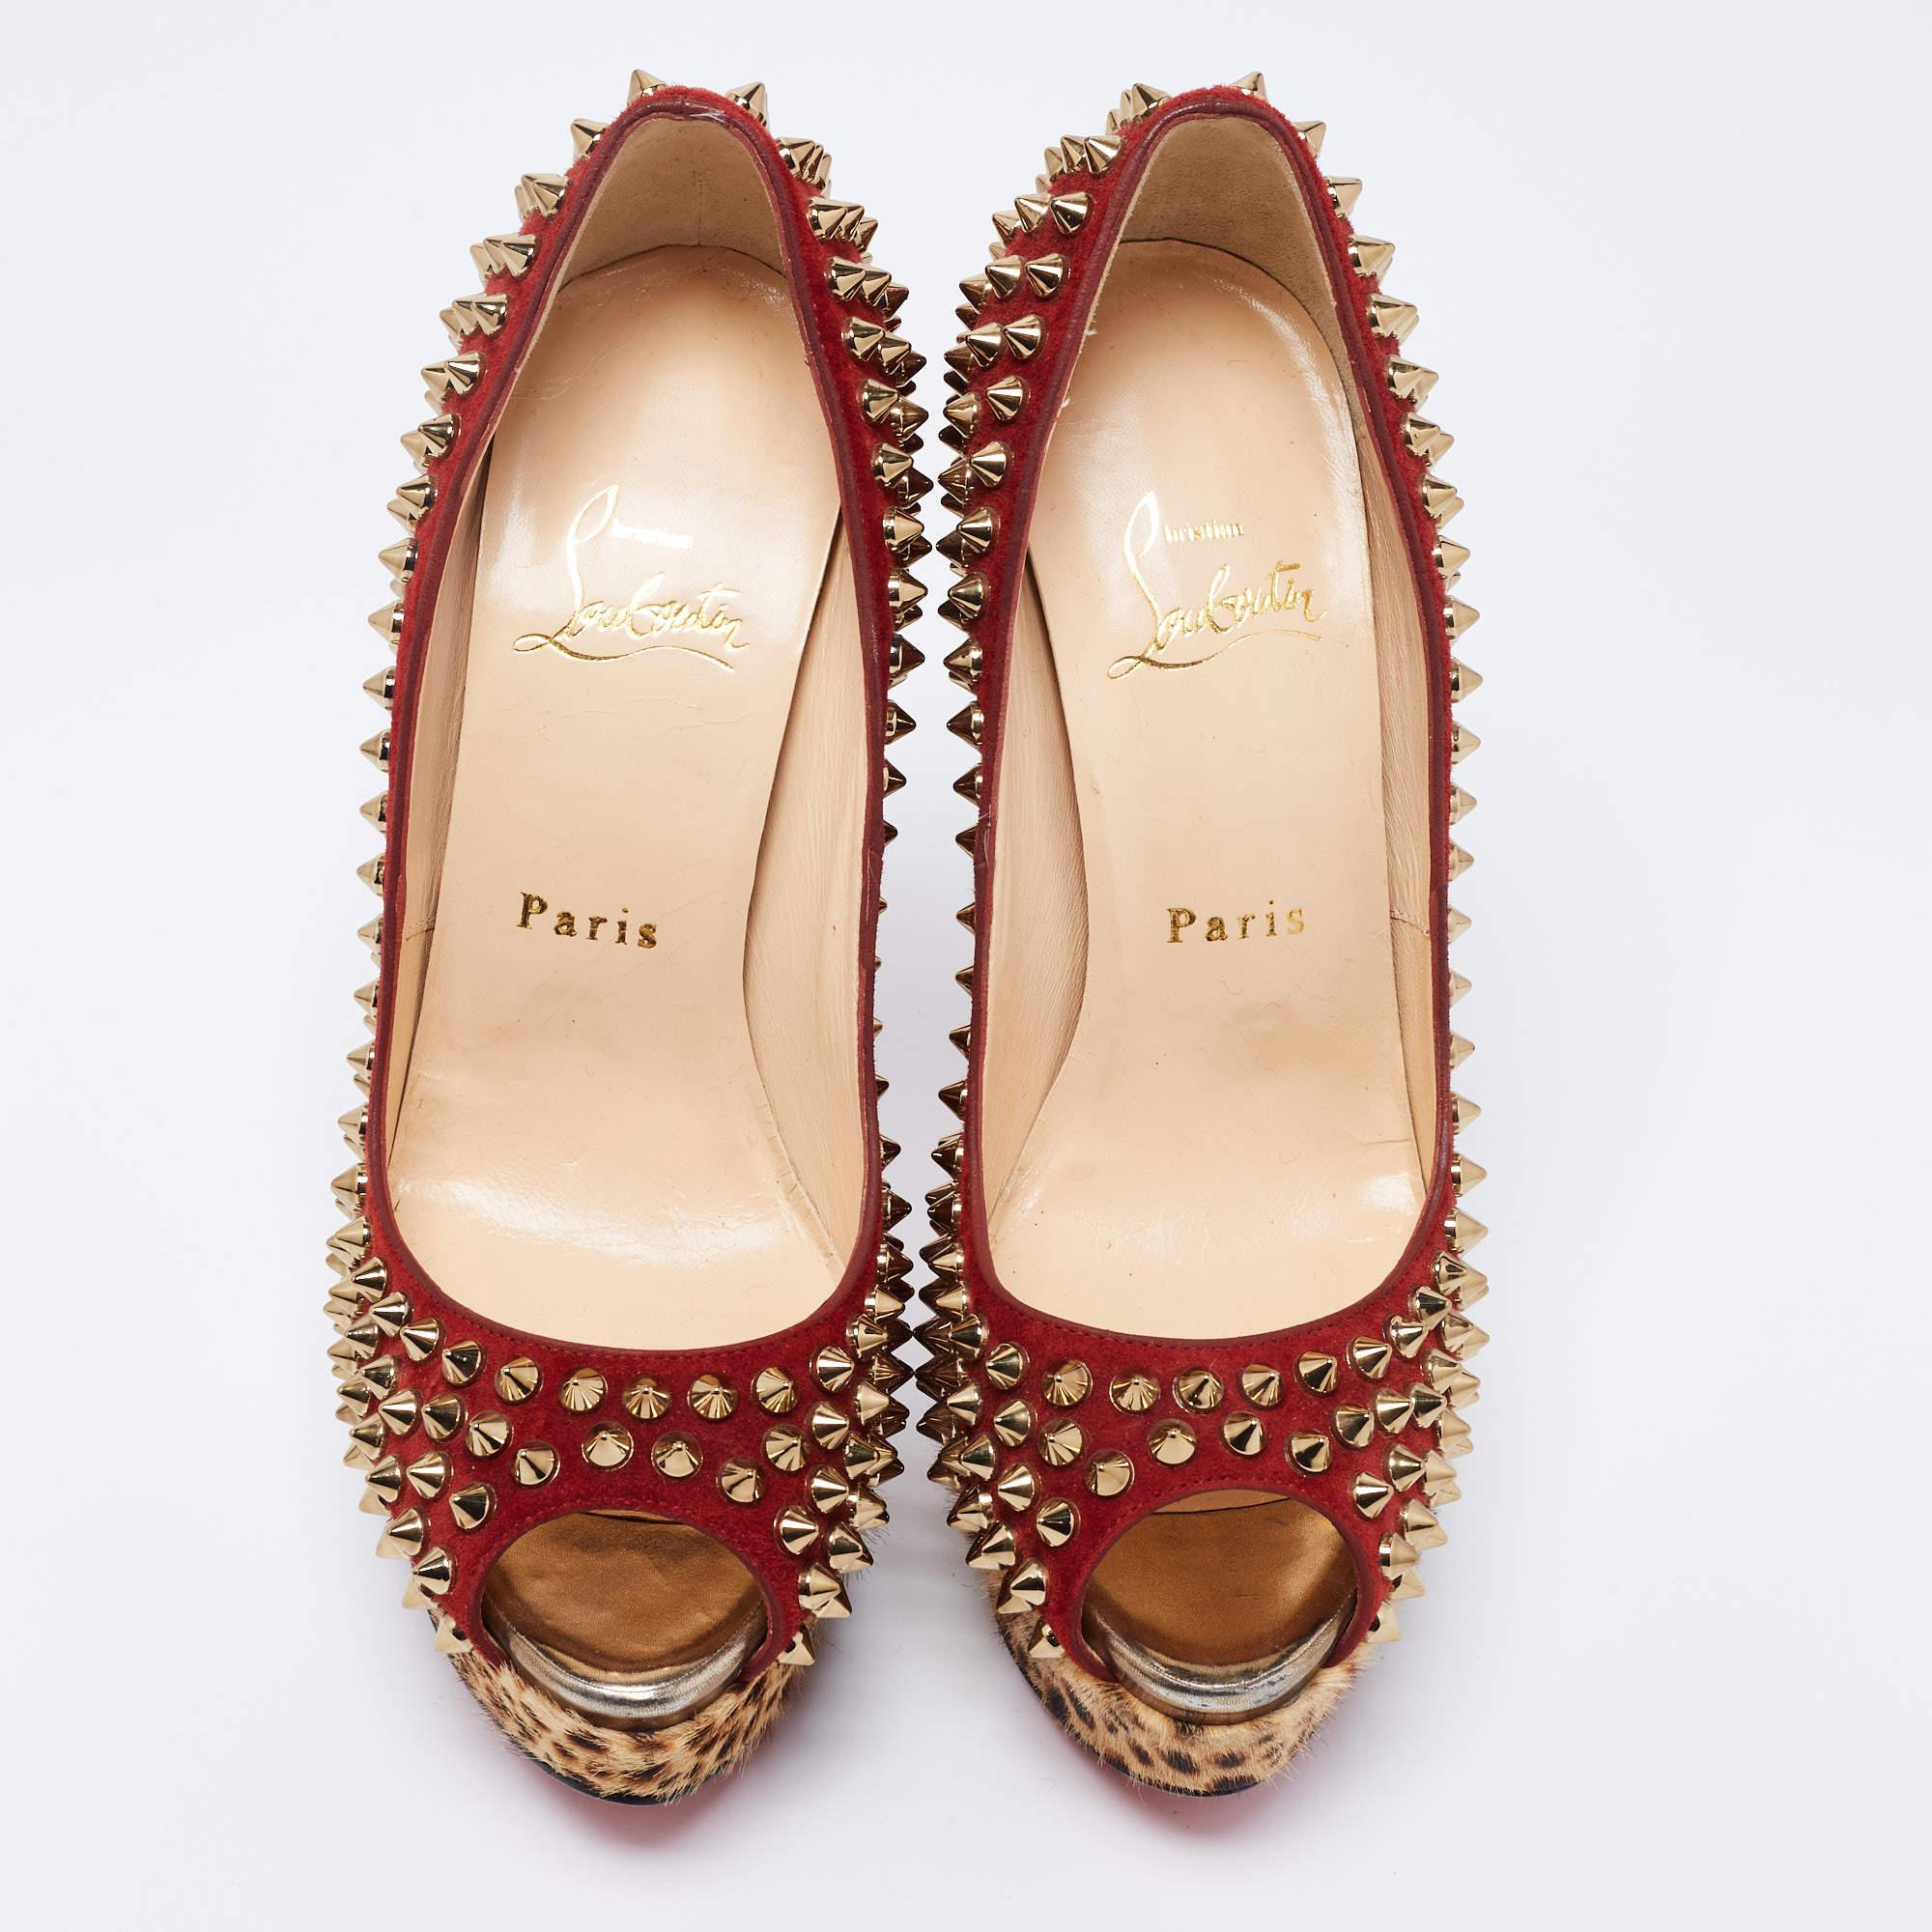 The alluring design and grand hue of these Christian Louboutin pumps make the pair a must-have. Crafted skilfully from dual materials, these spiked pumps are set on a durable base and comfortable heel. Choose this finely-designed pair of pumps to